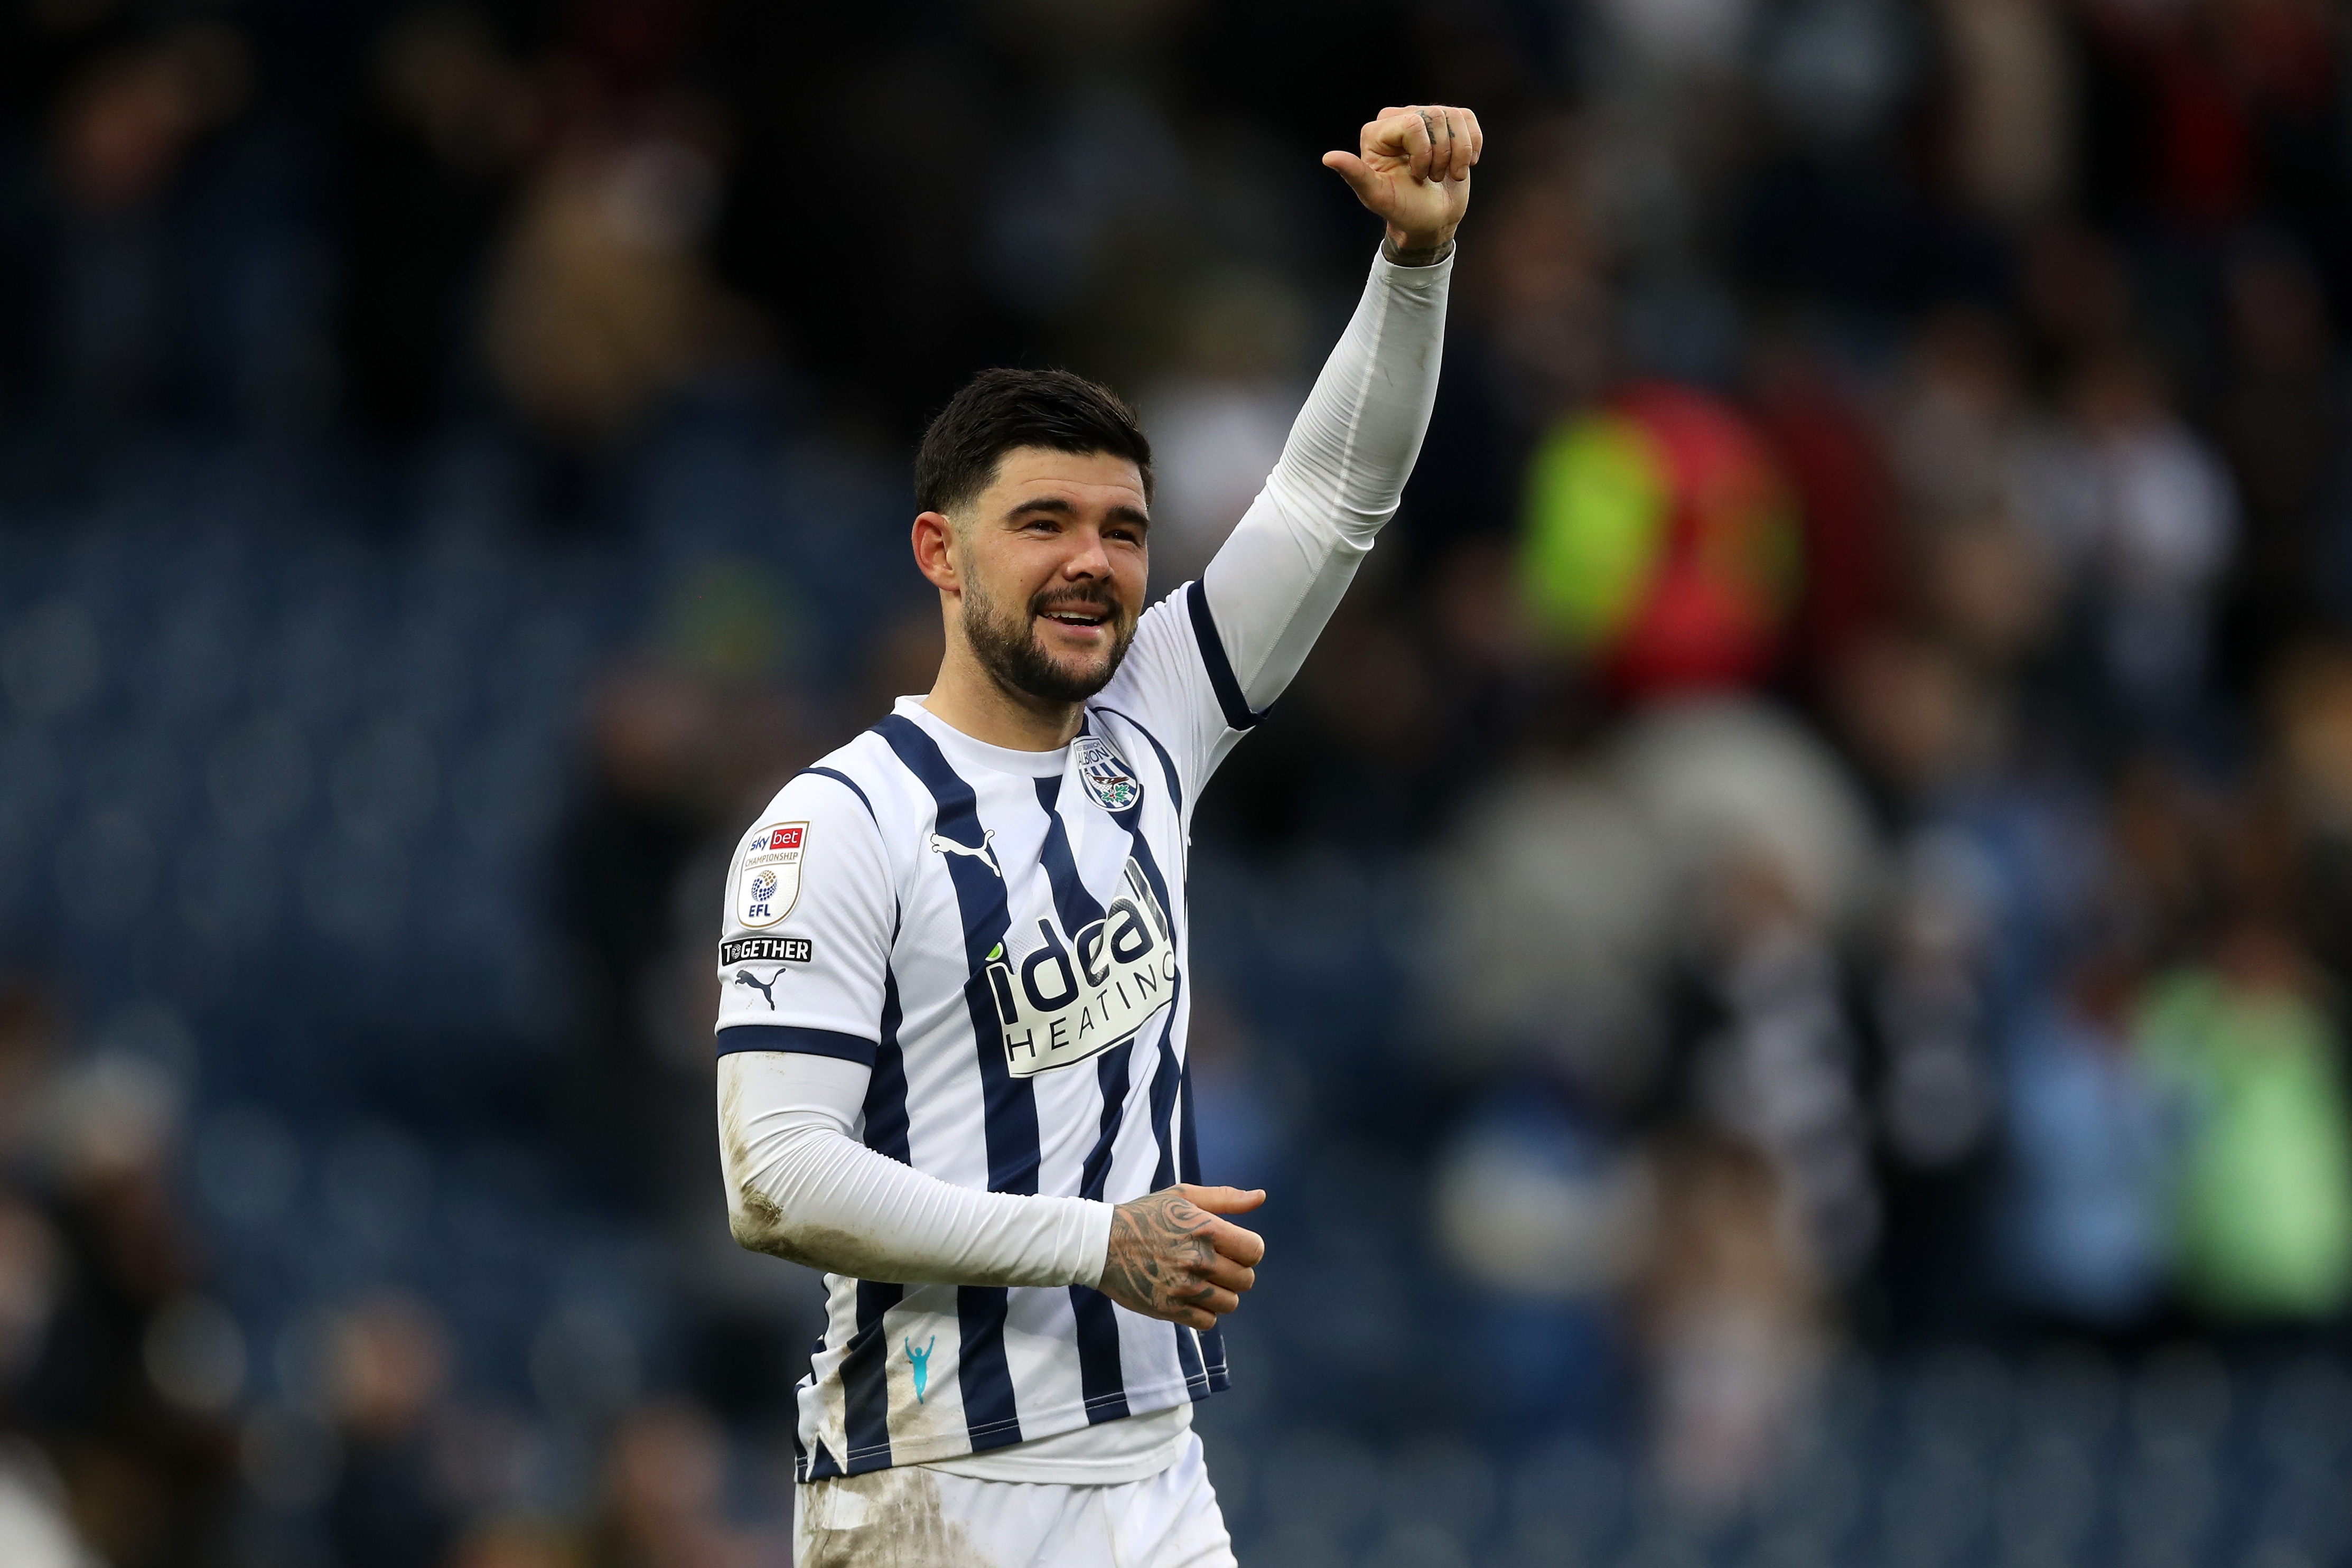 Alex Mowatt with his thumb up after beating Bristol City 